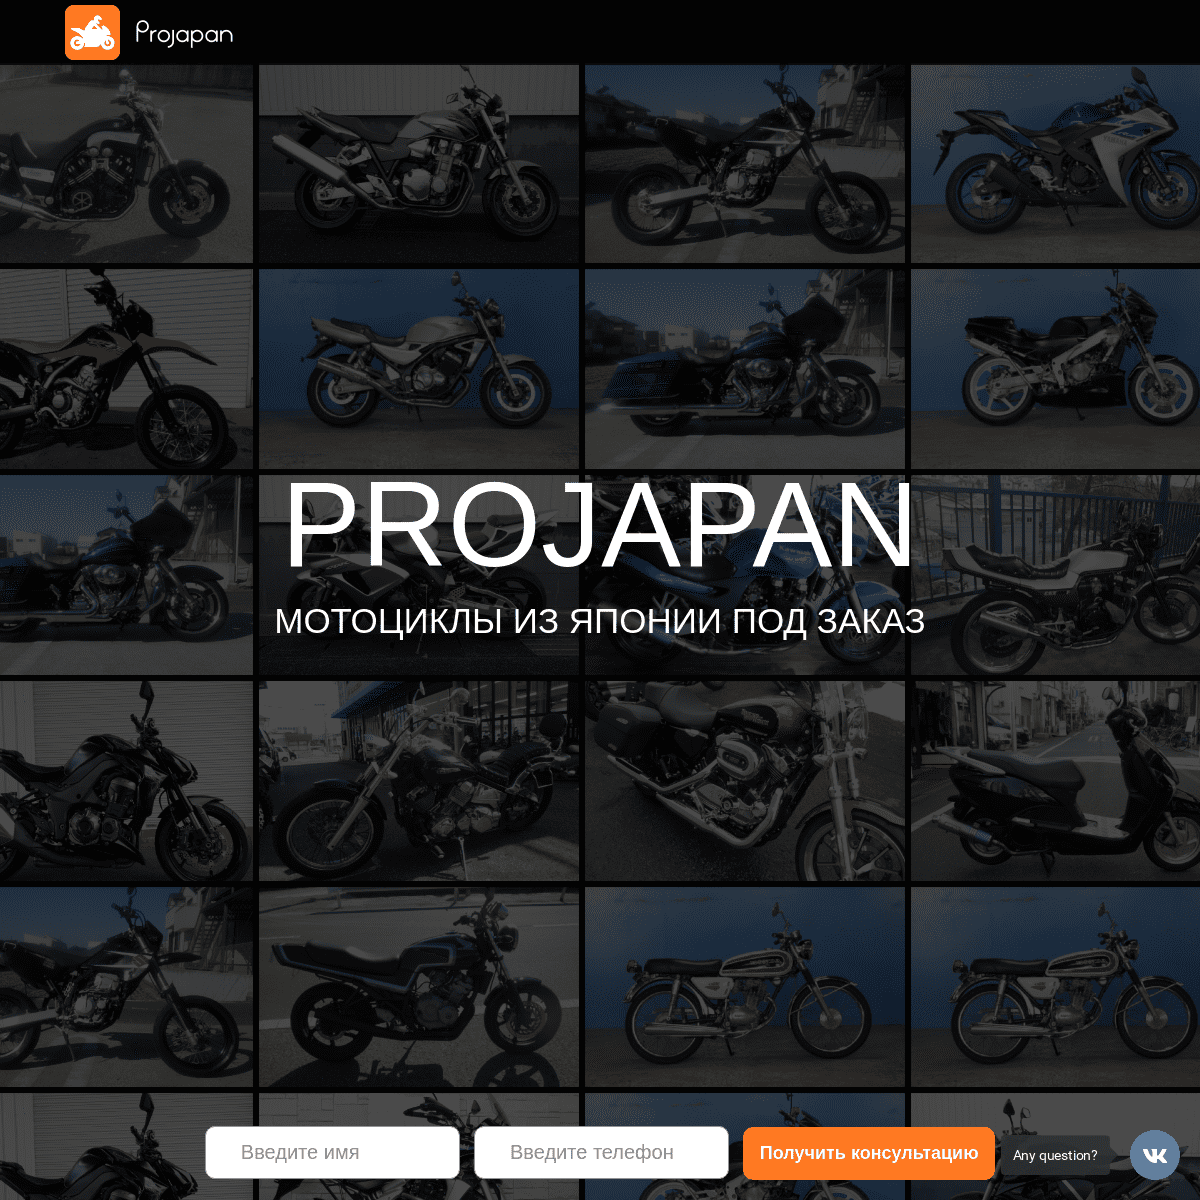 A complete backup of projapan.ru